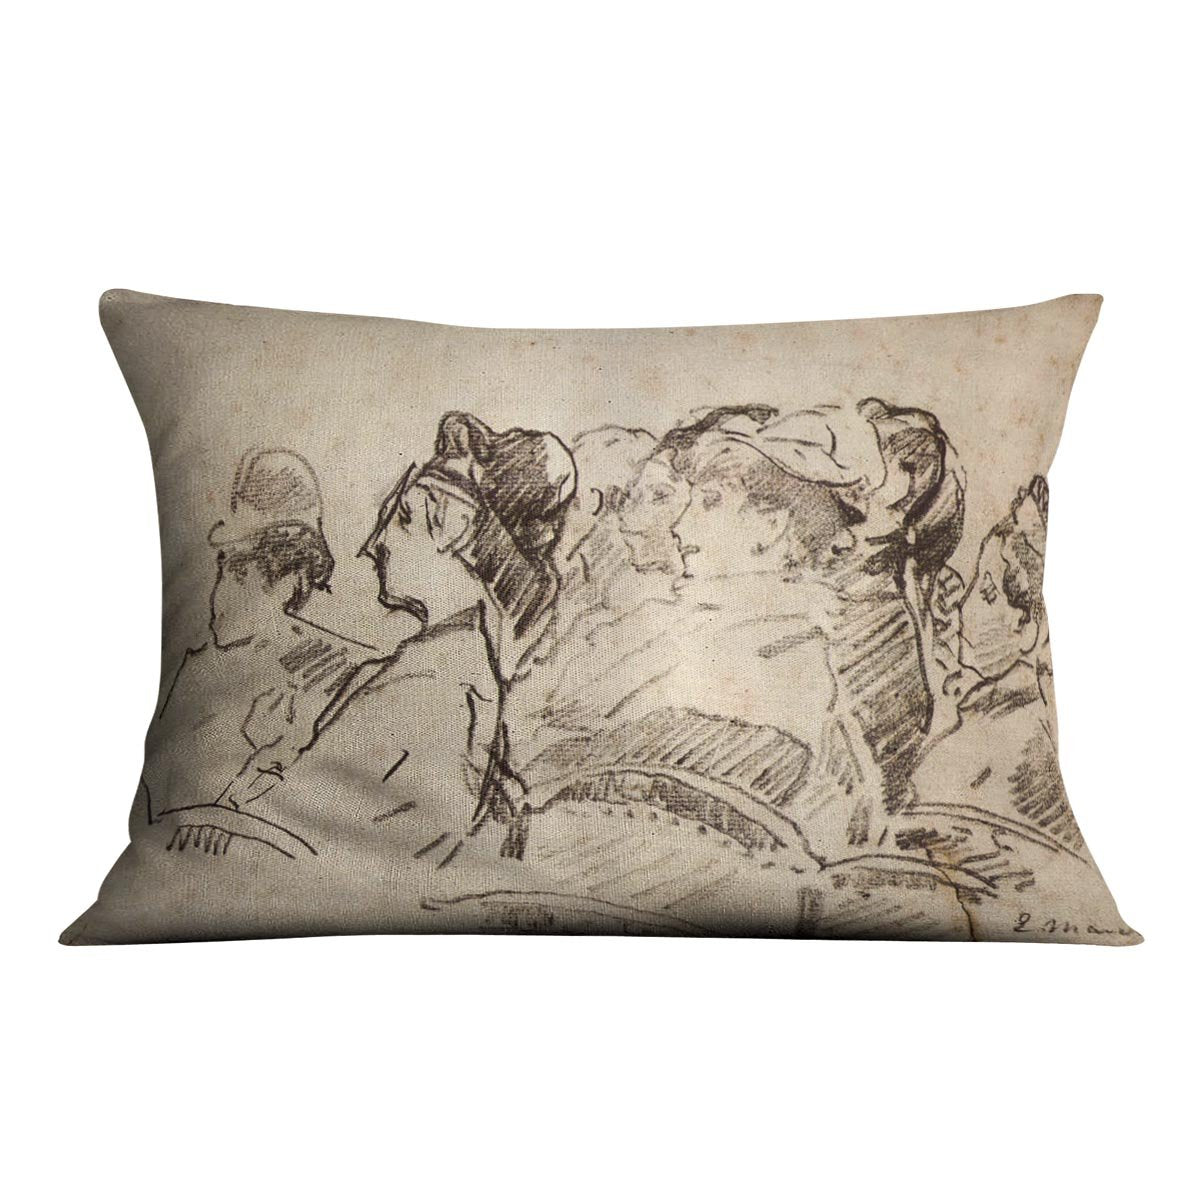 At the Theater by Manet Throw Pillow